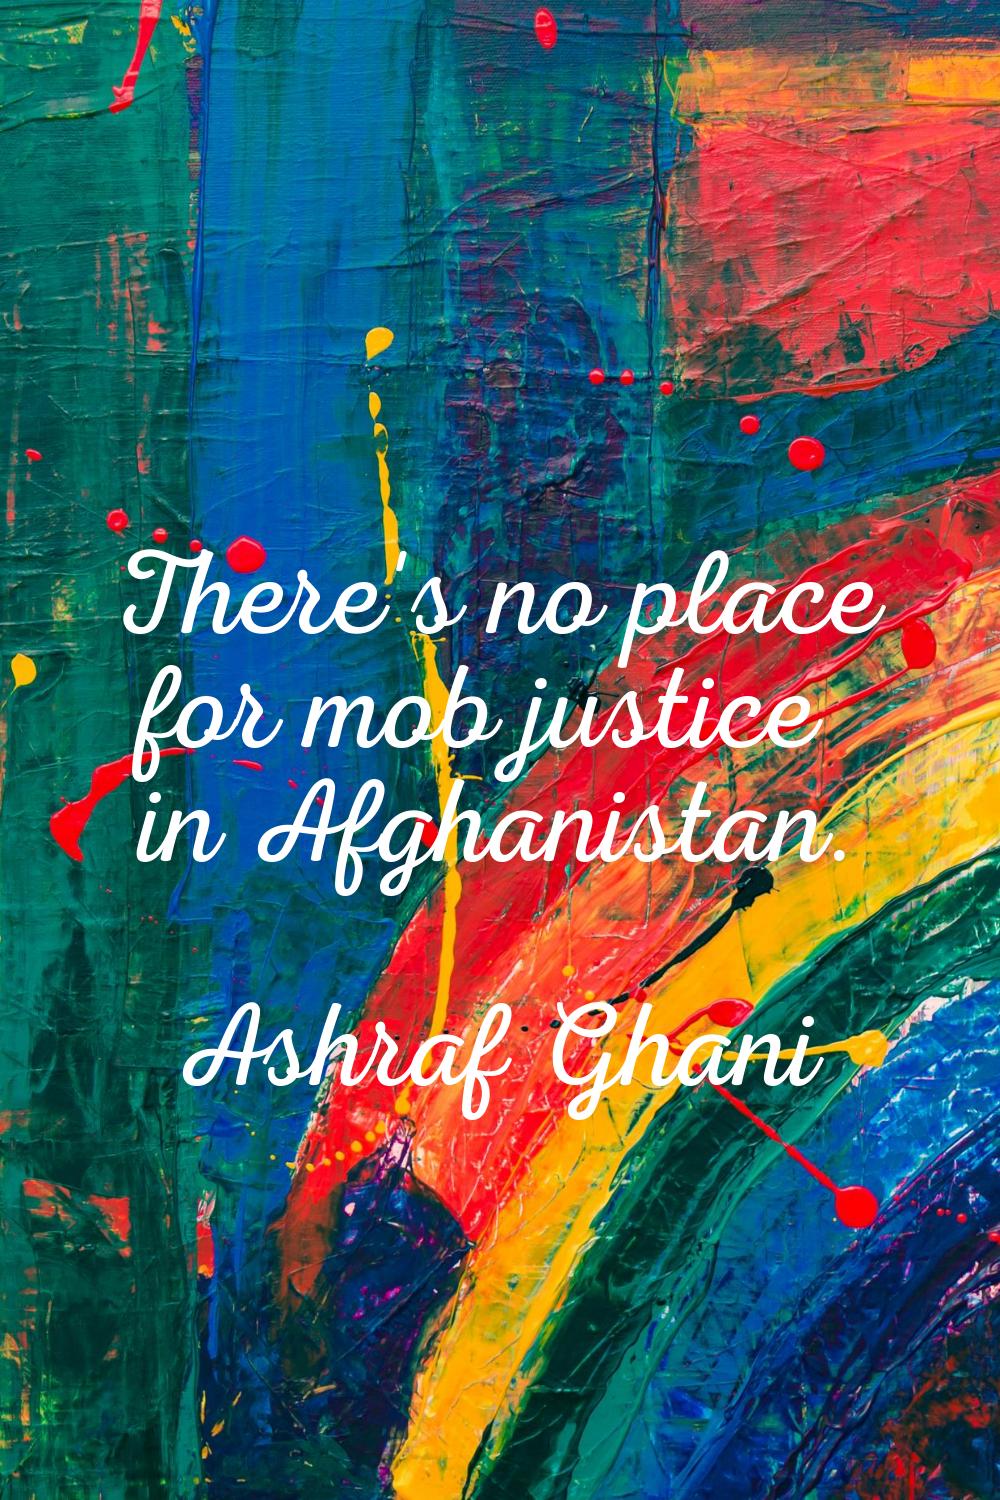 There's no place for mob justice in Afghanistan.